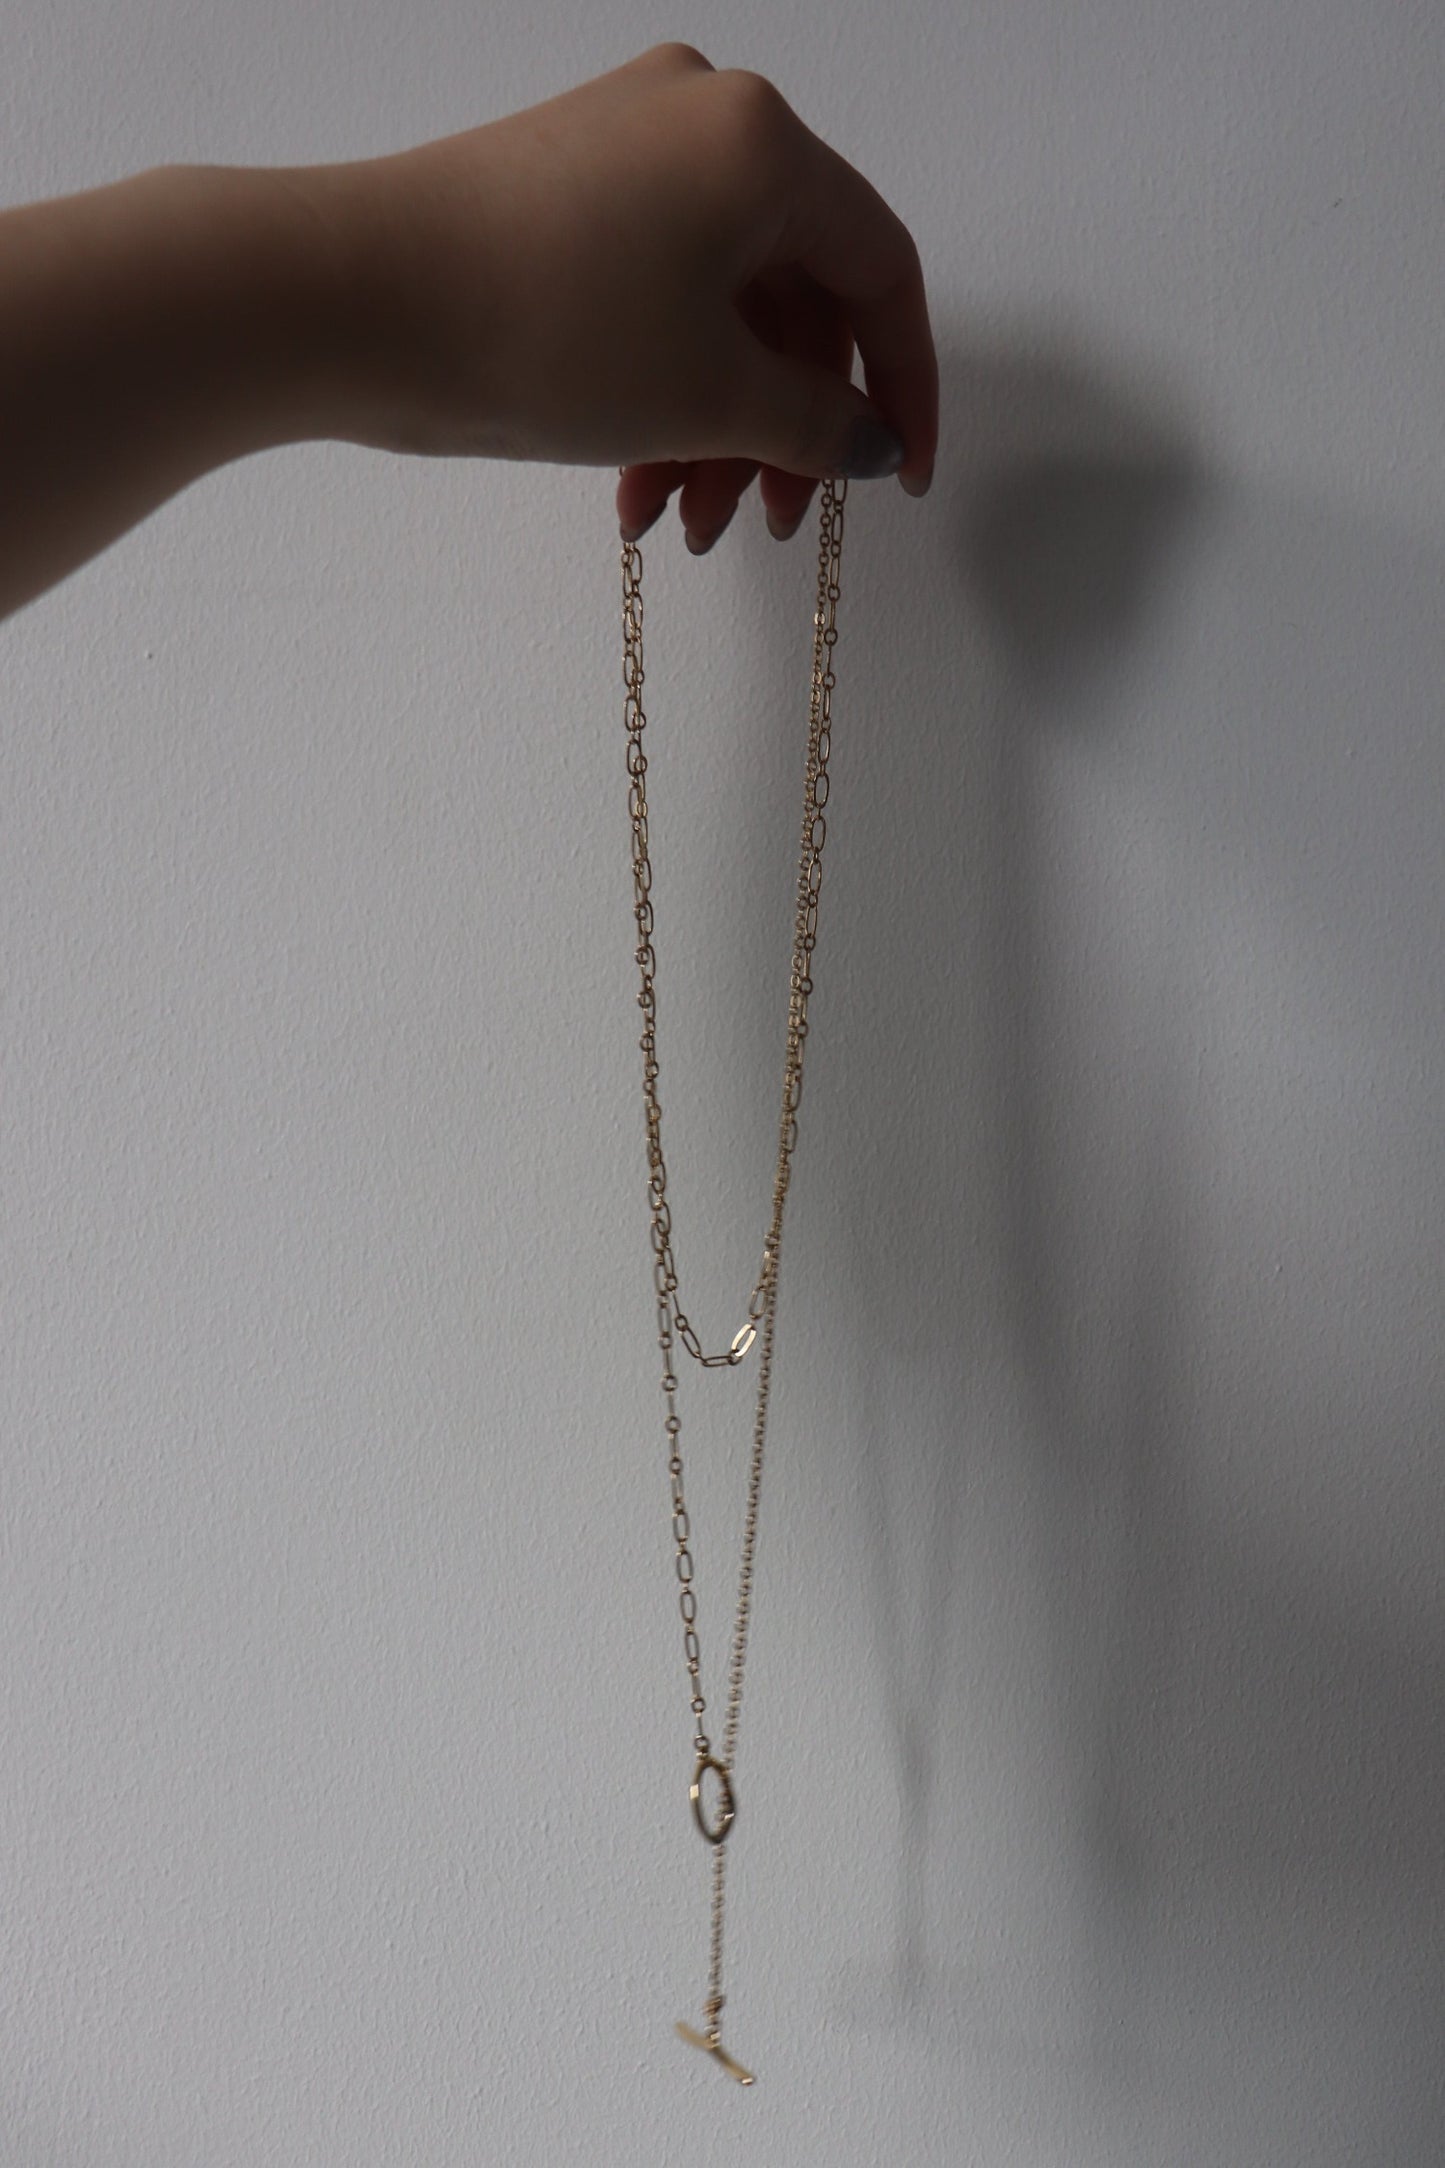 rod hang necklace